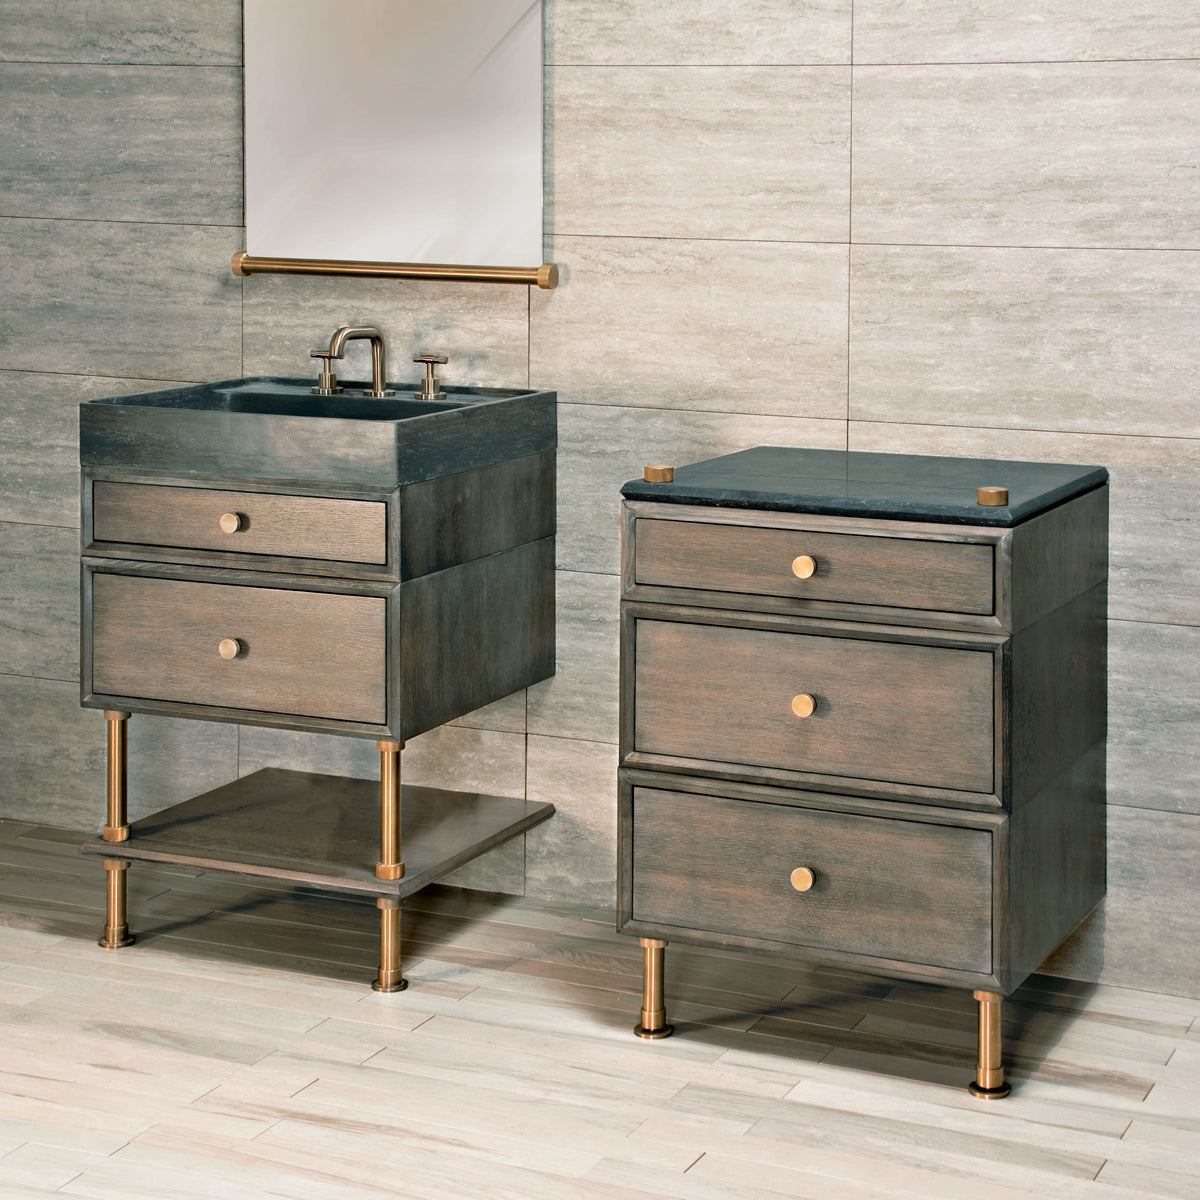 Ventus Bath Sink with Faucet Deck in antique gray limestone paired with Elemental Classic Vanity with Split Drawers in aged brass image 1 of 2